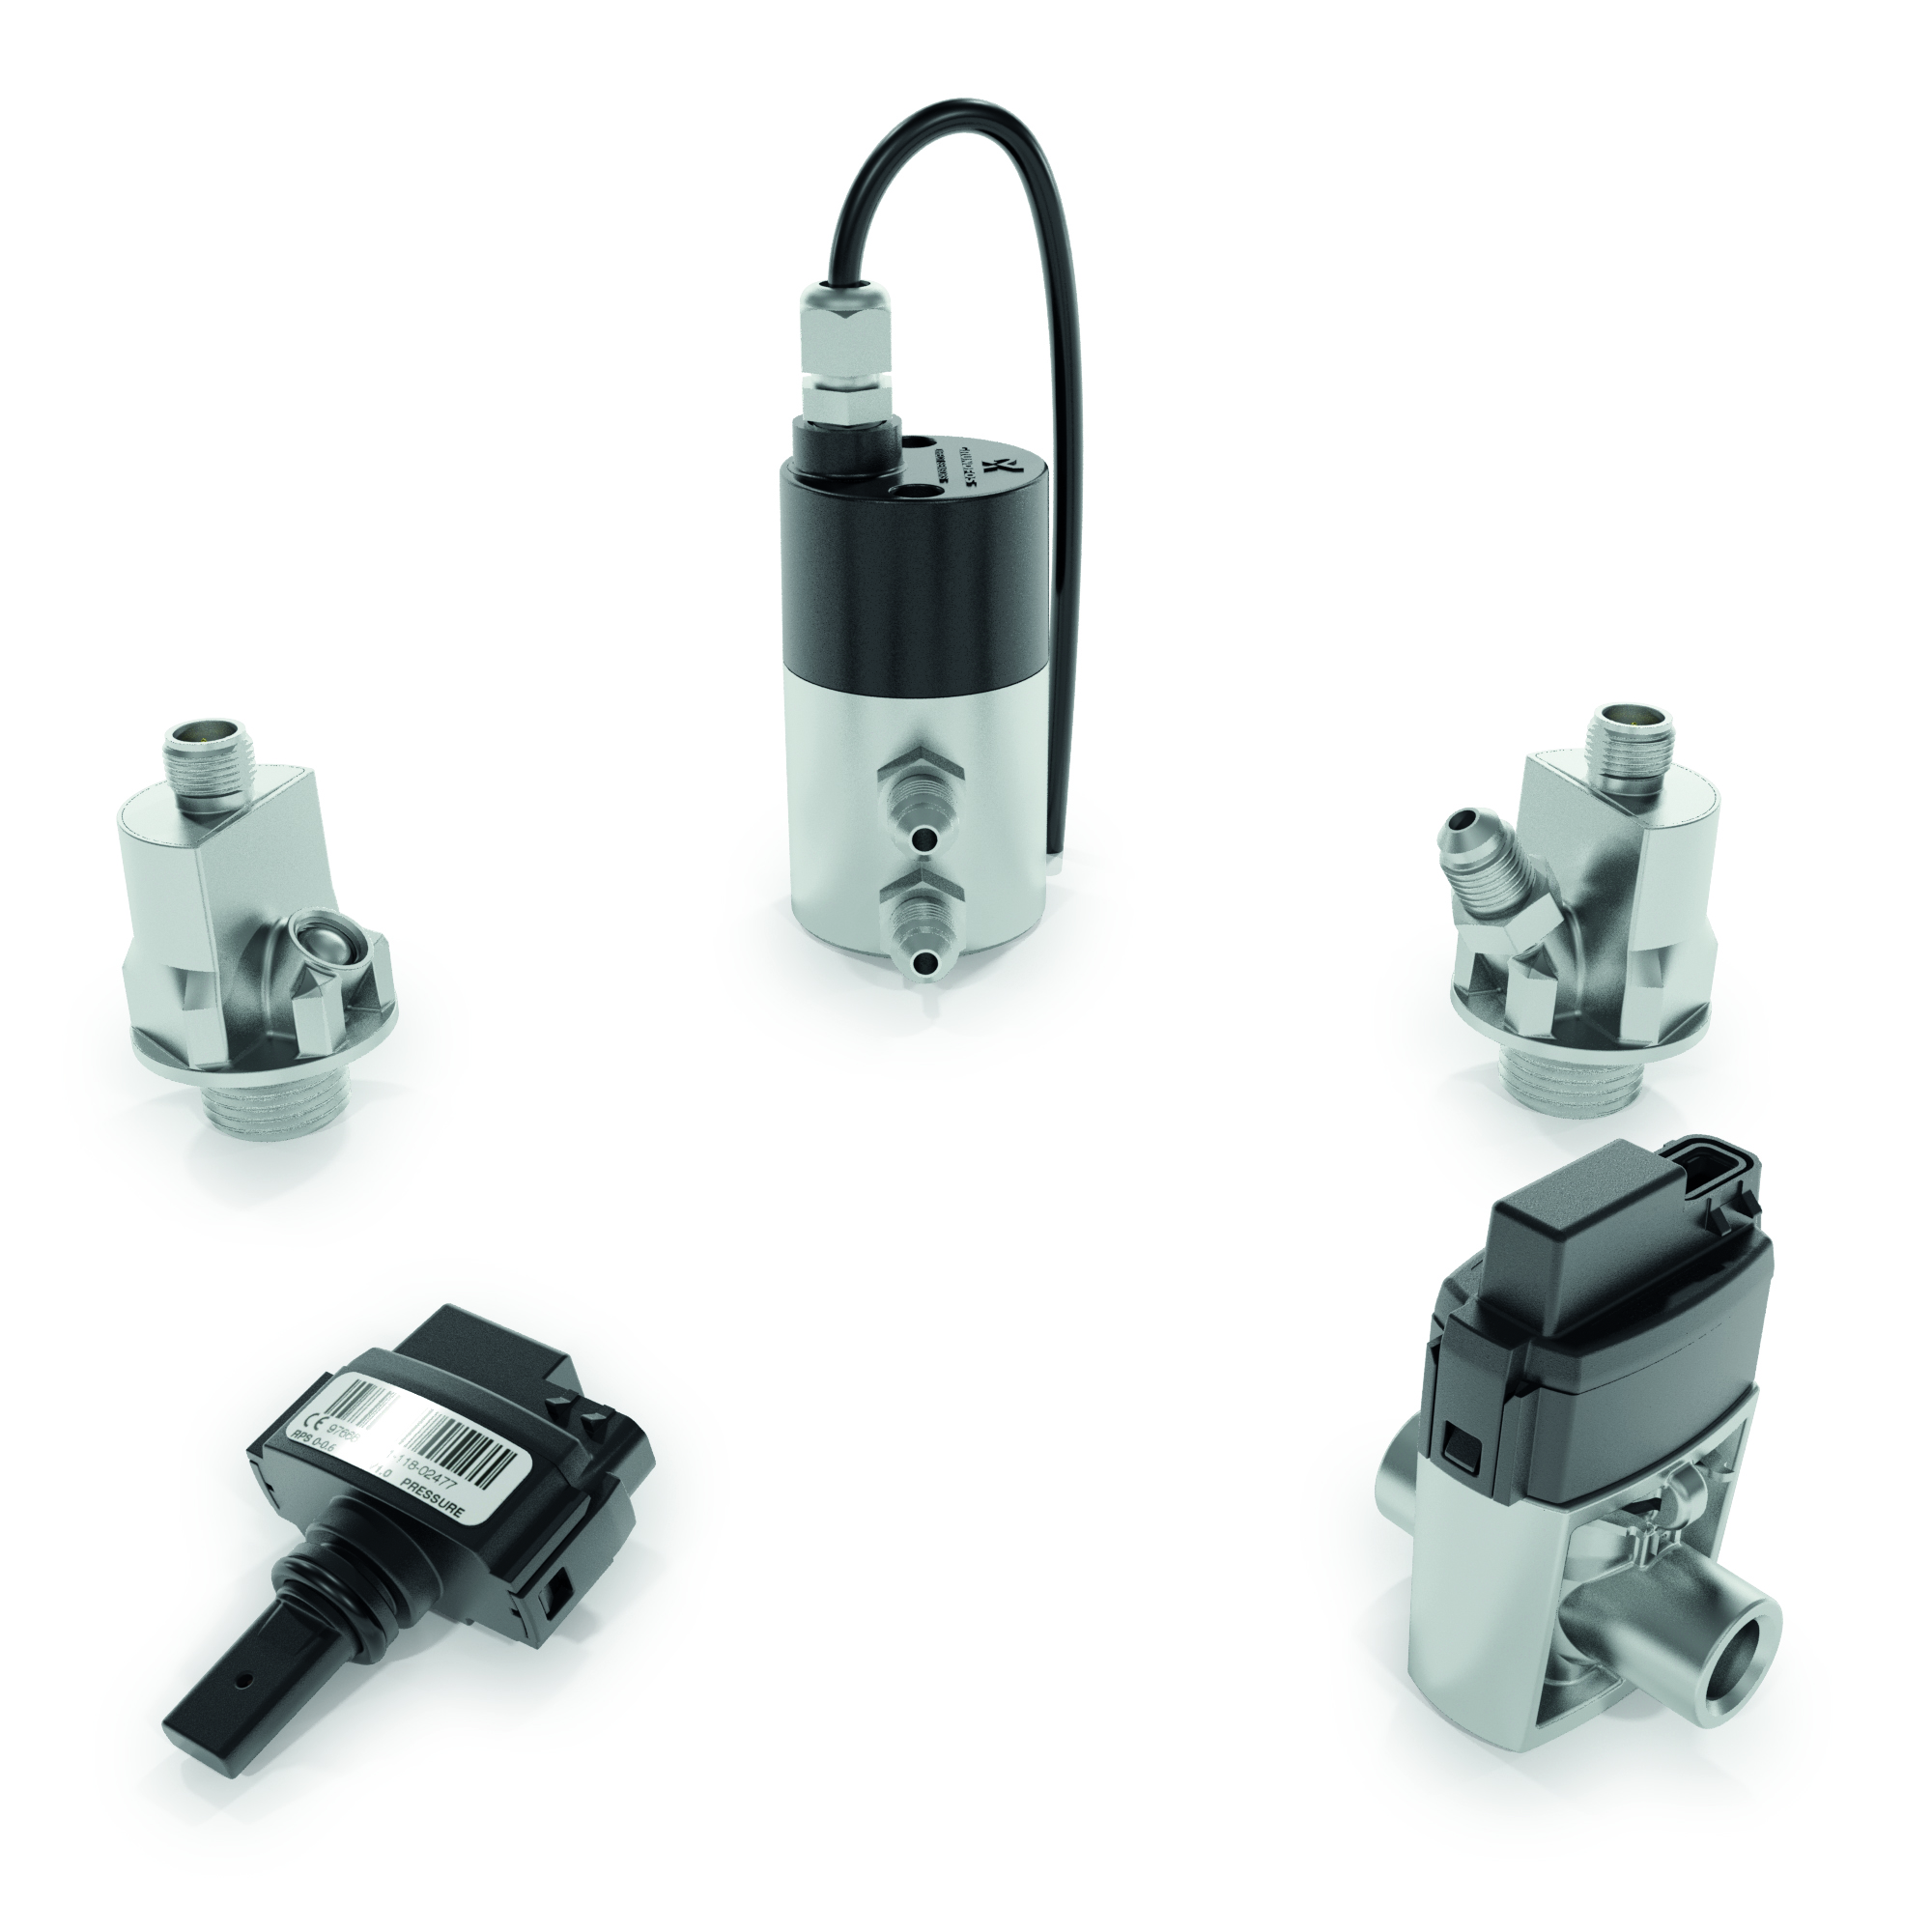 Grundfos Direct Sensors with patented Silicoat® technology